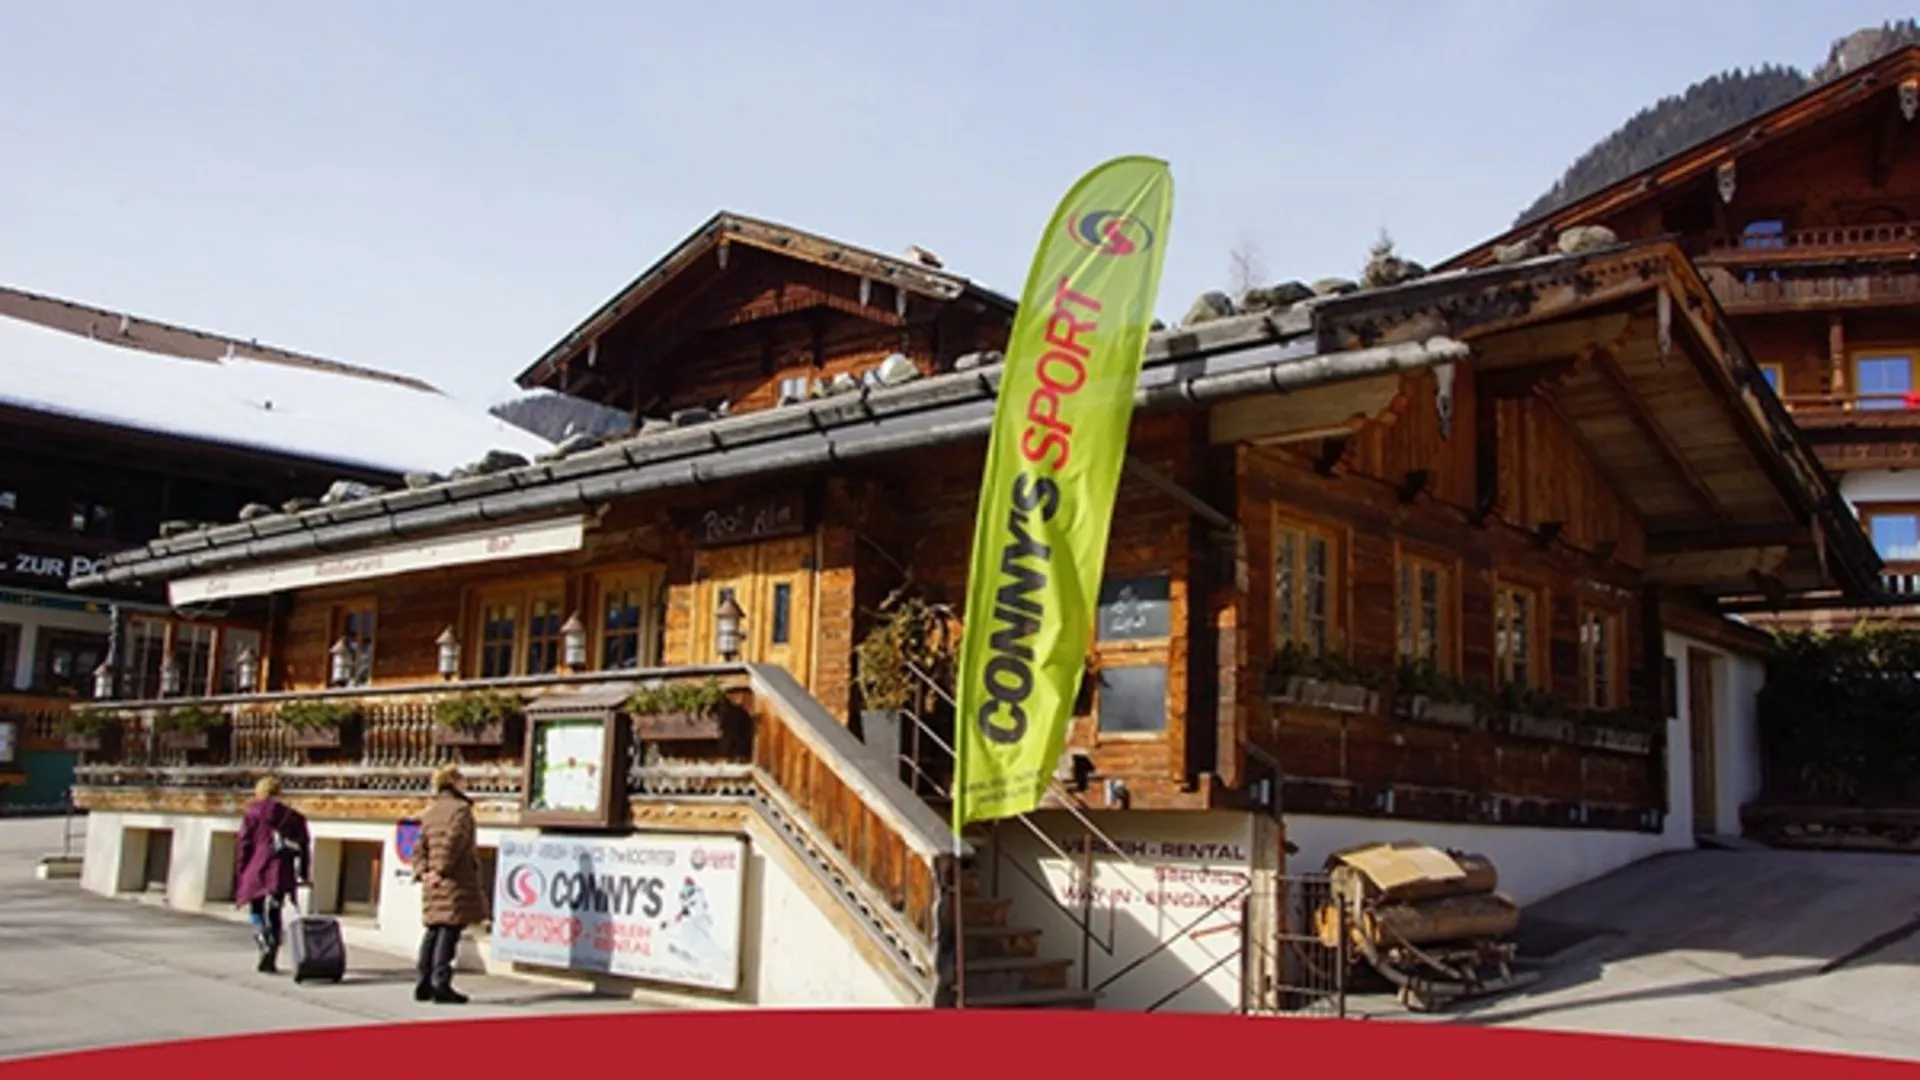 Connys Sport RENTALS Alpbach in Austria, Europe | Snowboarding,Skiing - Rated 0.9